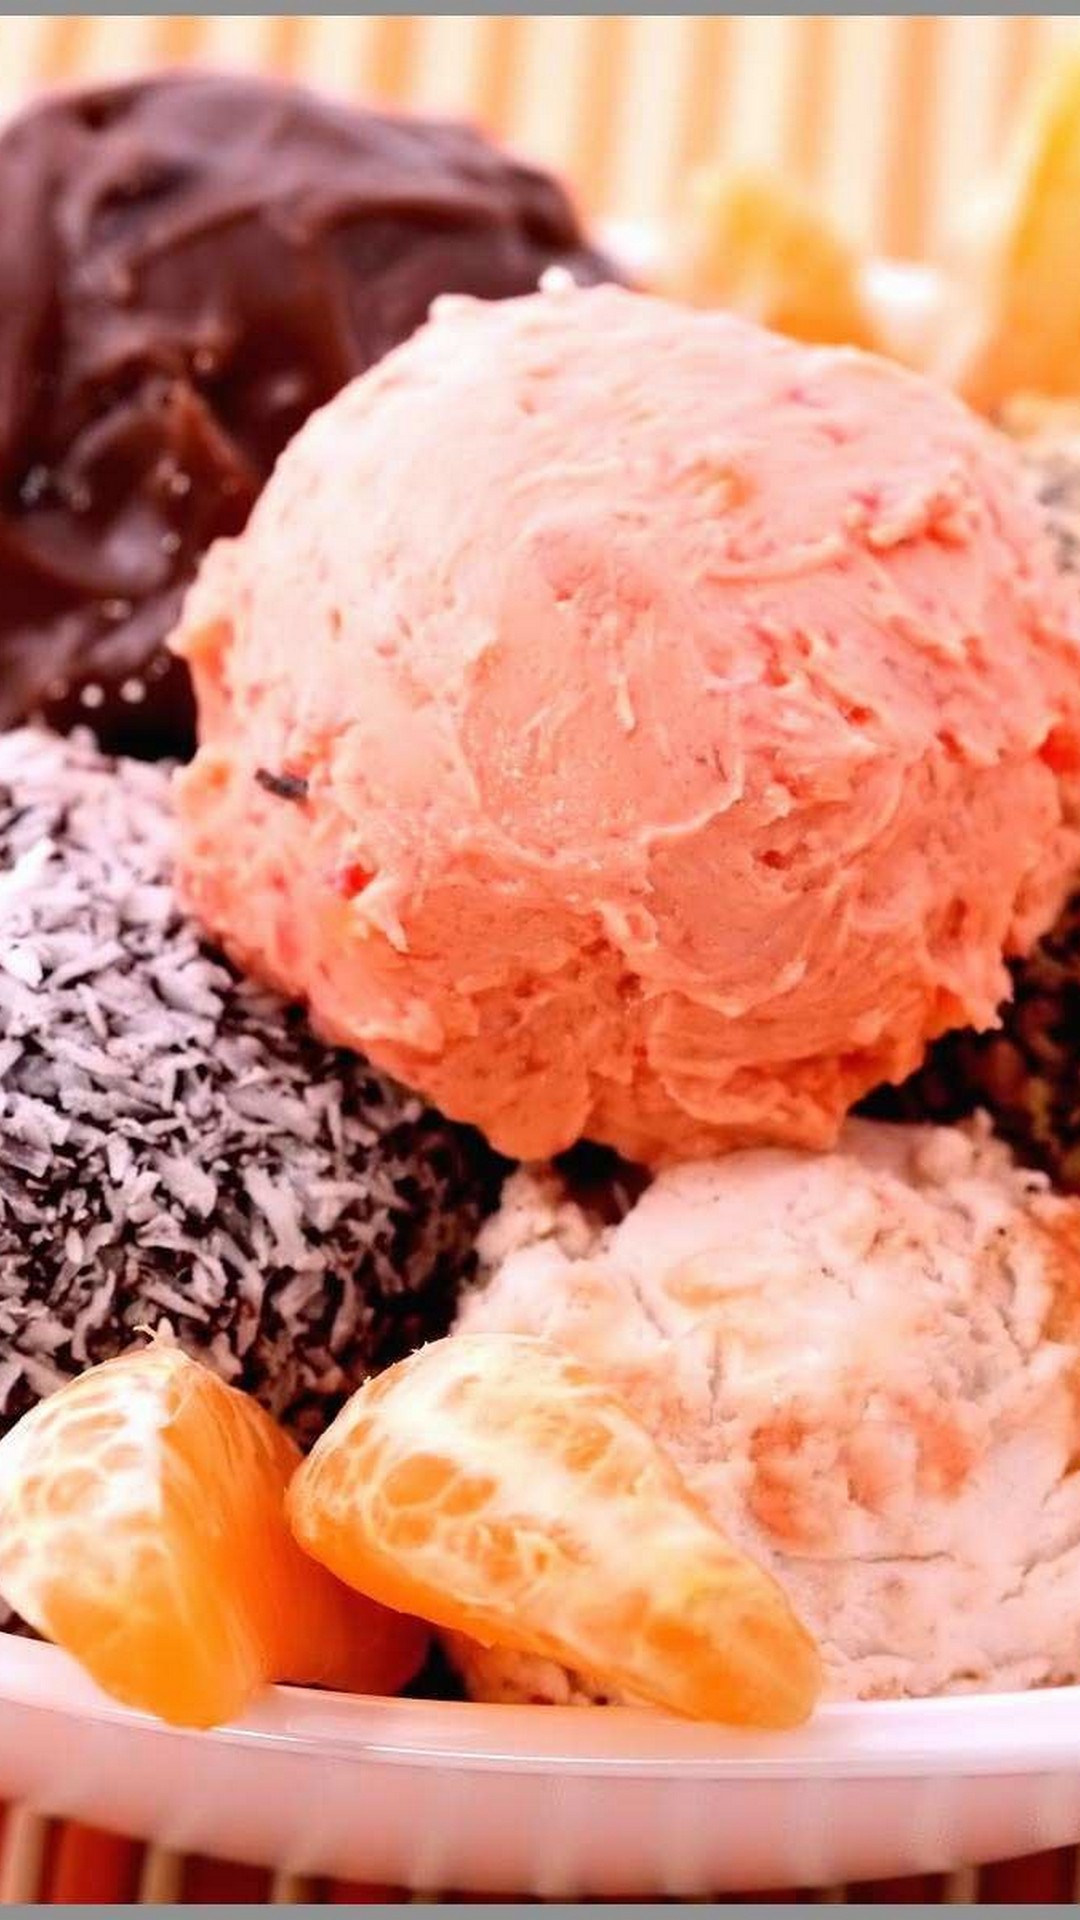 Android Wallpaper HD Ice Cream With high-resolution 1080X1920 pixel. You can use this wallpaper for your Android backgrounds, Tablet, Samsung Screensavers, Mobile Phone Lock Screen and another Smartphones device